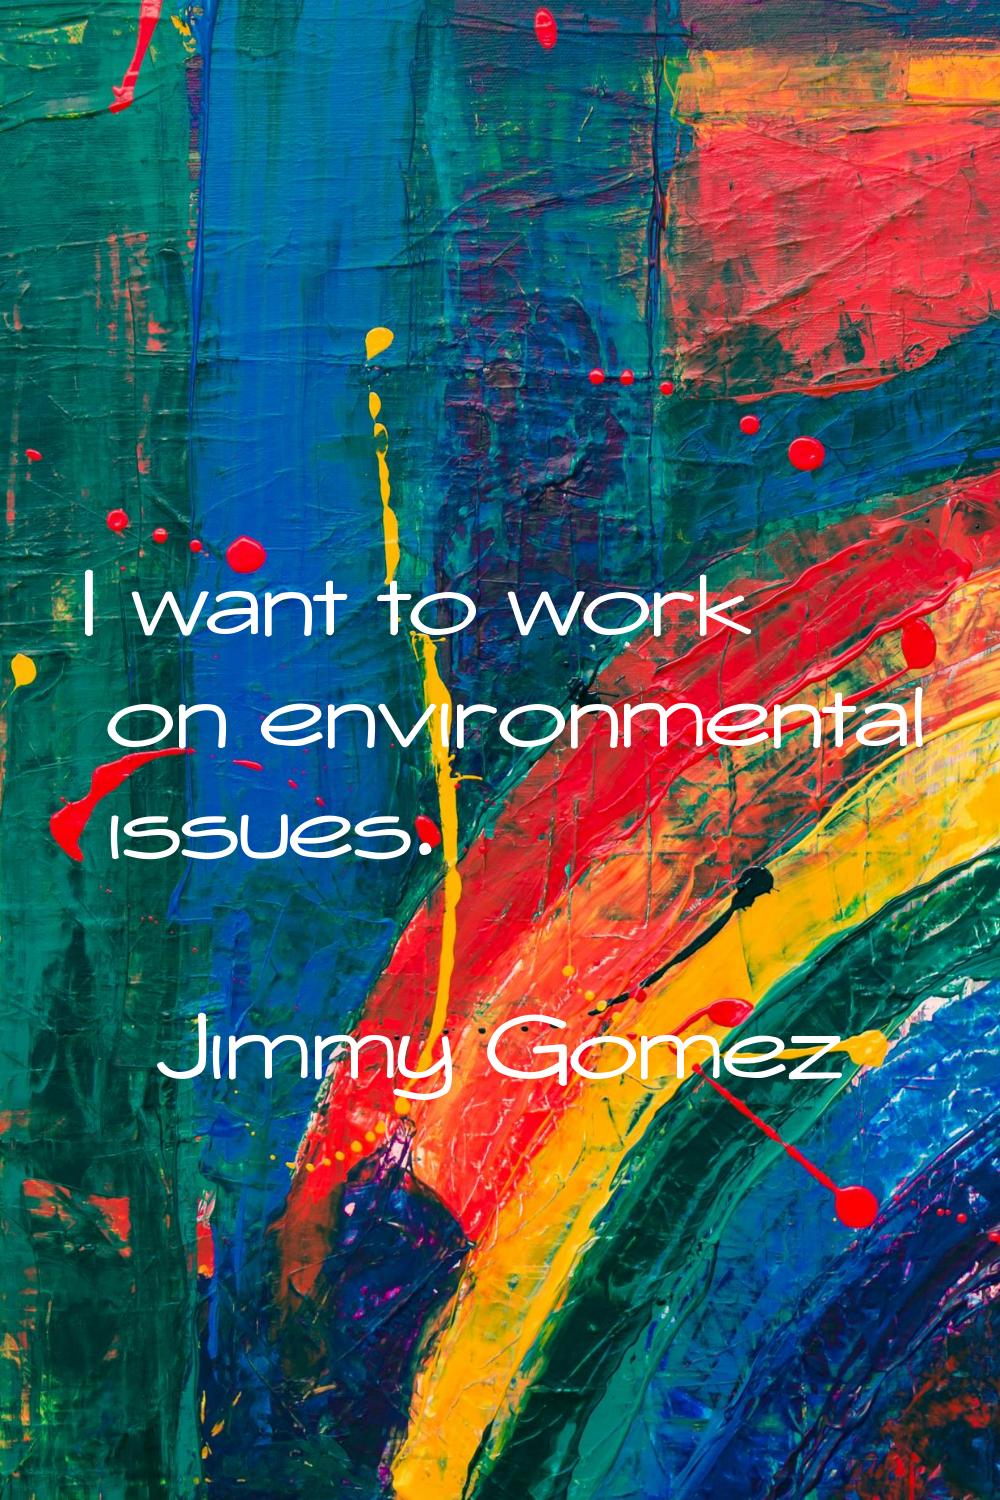 I want to work on environmental issues.